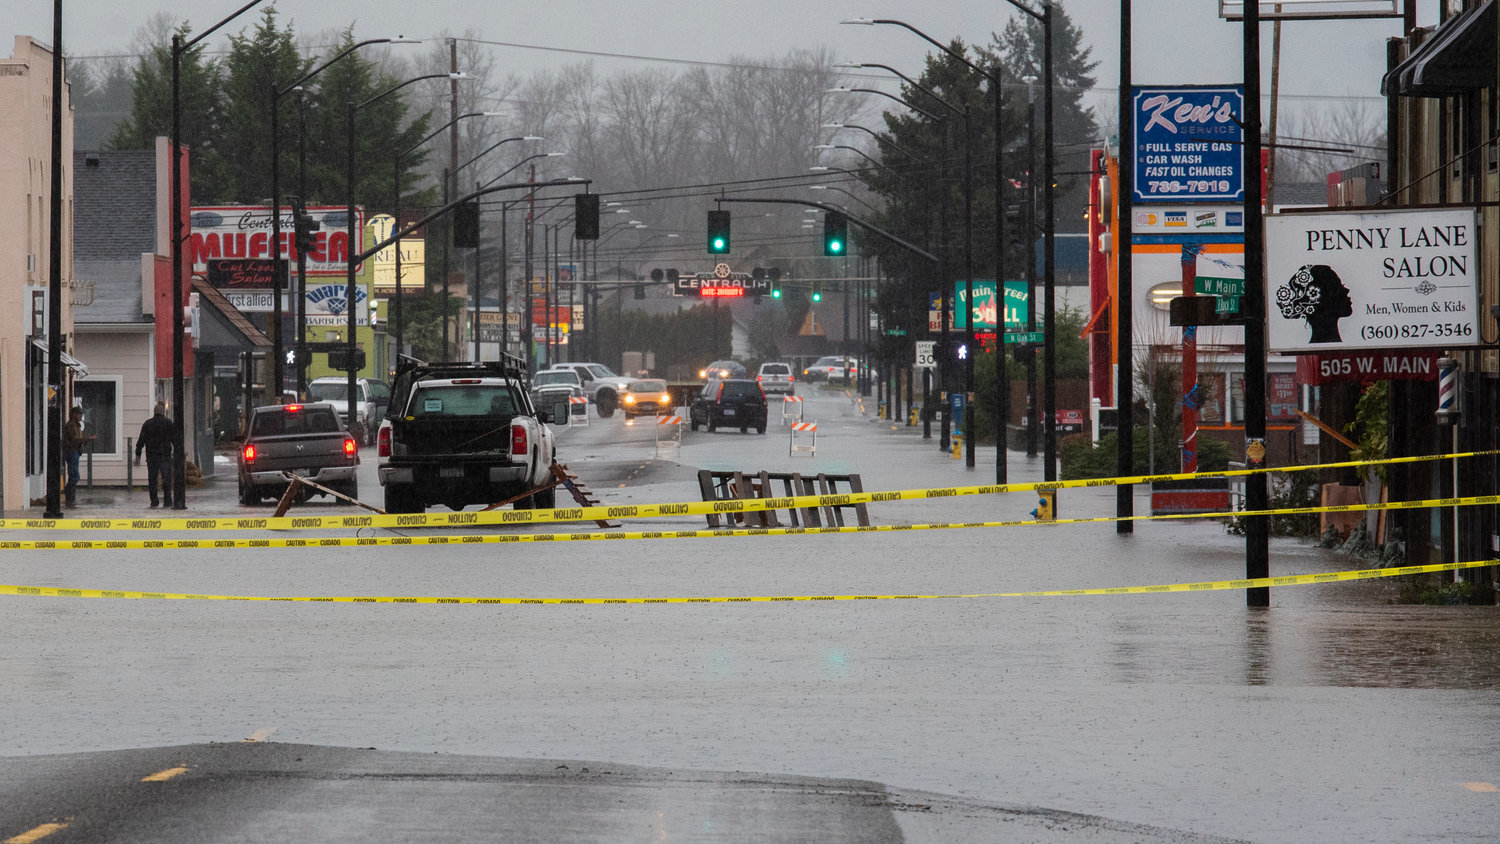 West Main Street in Centralia is taped off with caution tape as floodwaters stretch across the roadway in January 2022.